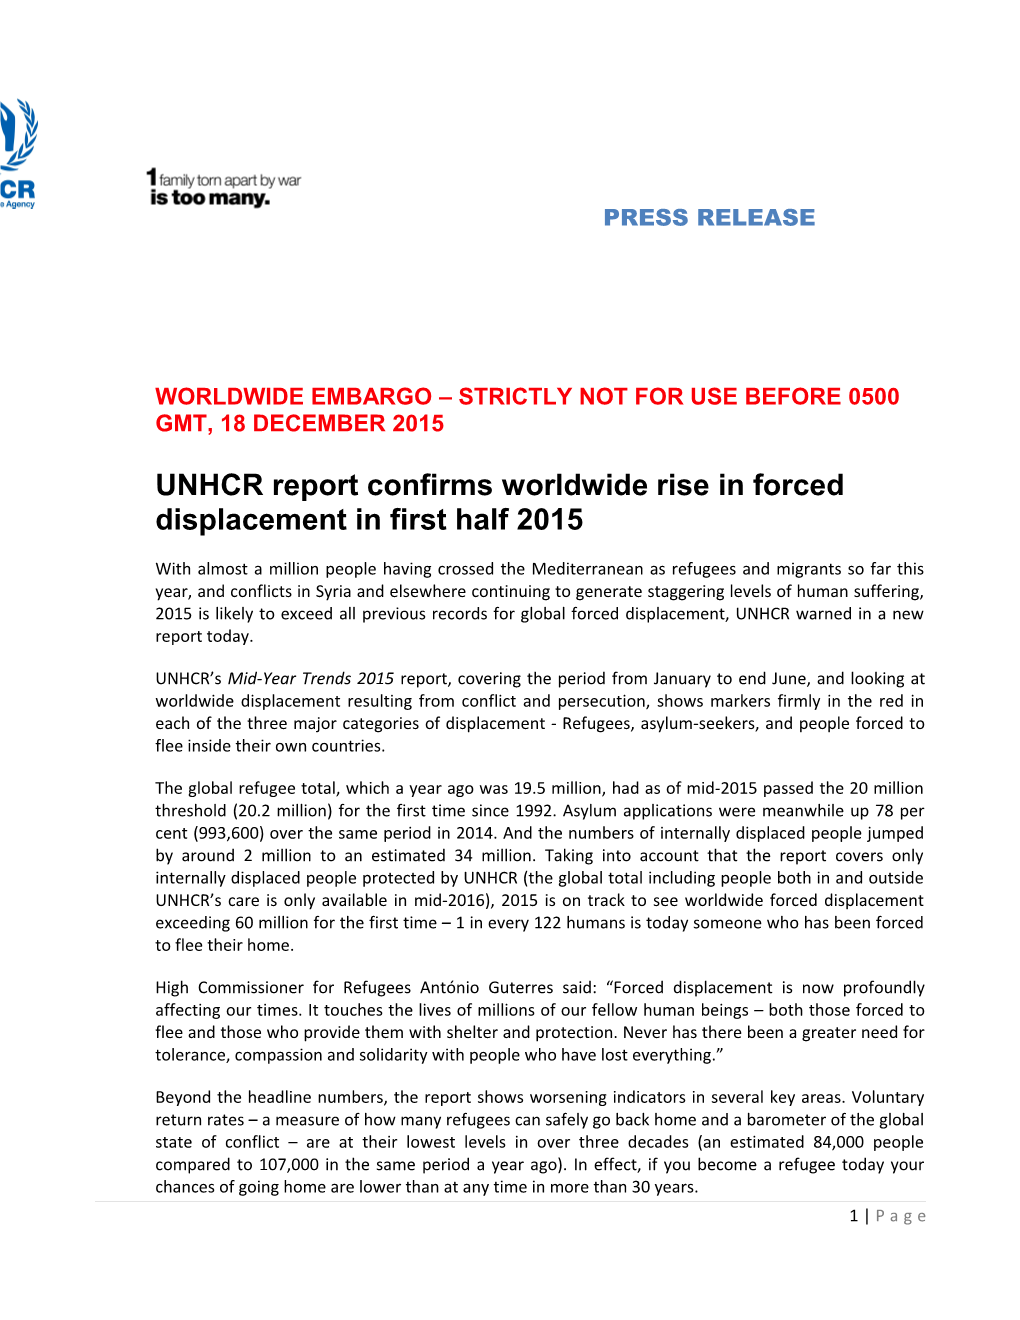 UNHCR Report Confirms Worldwide Rise in Forced Displacement in First Half 2015